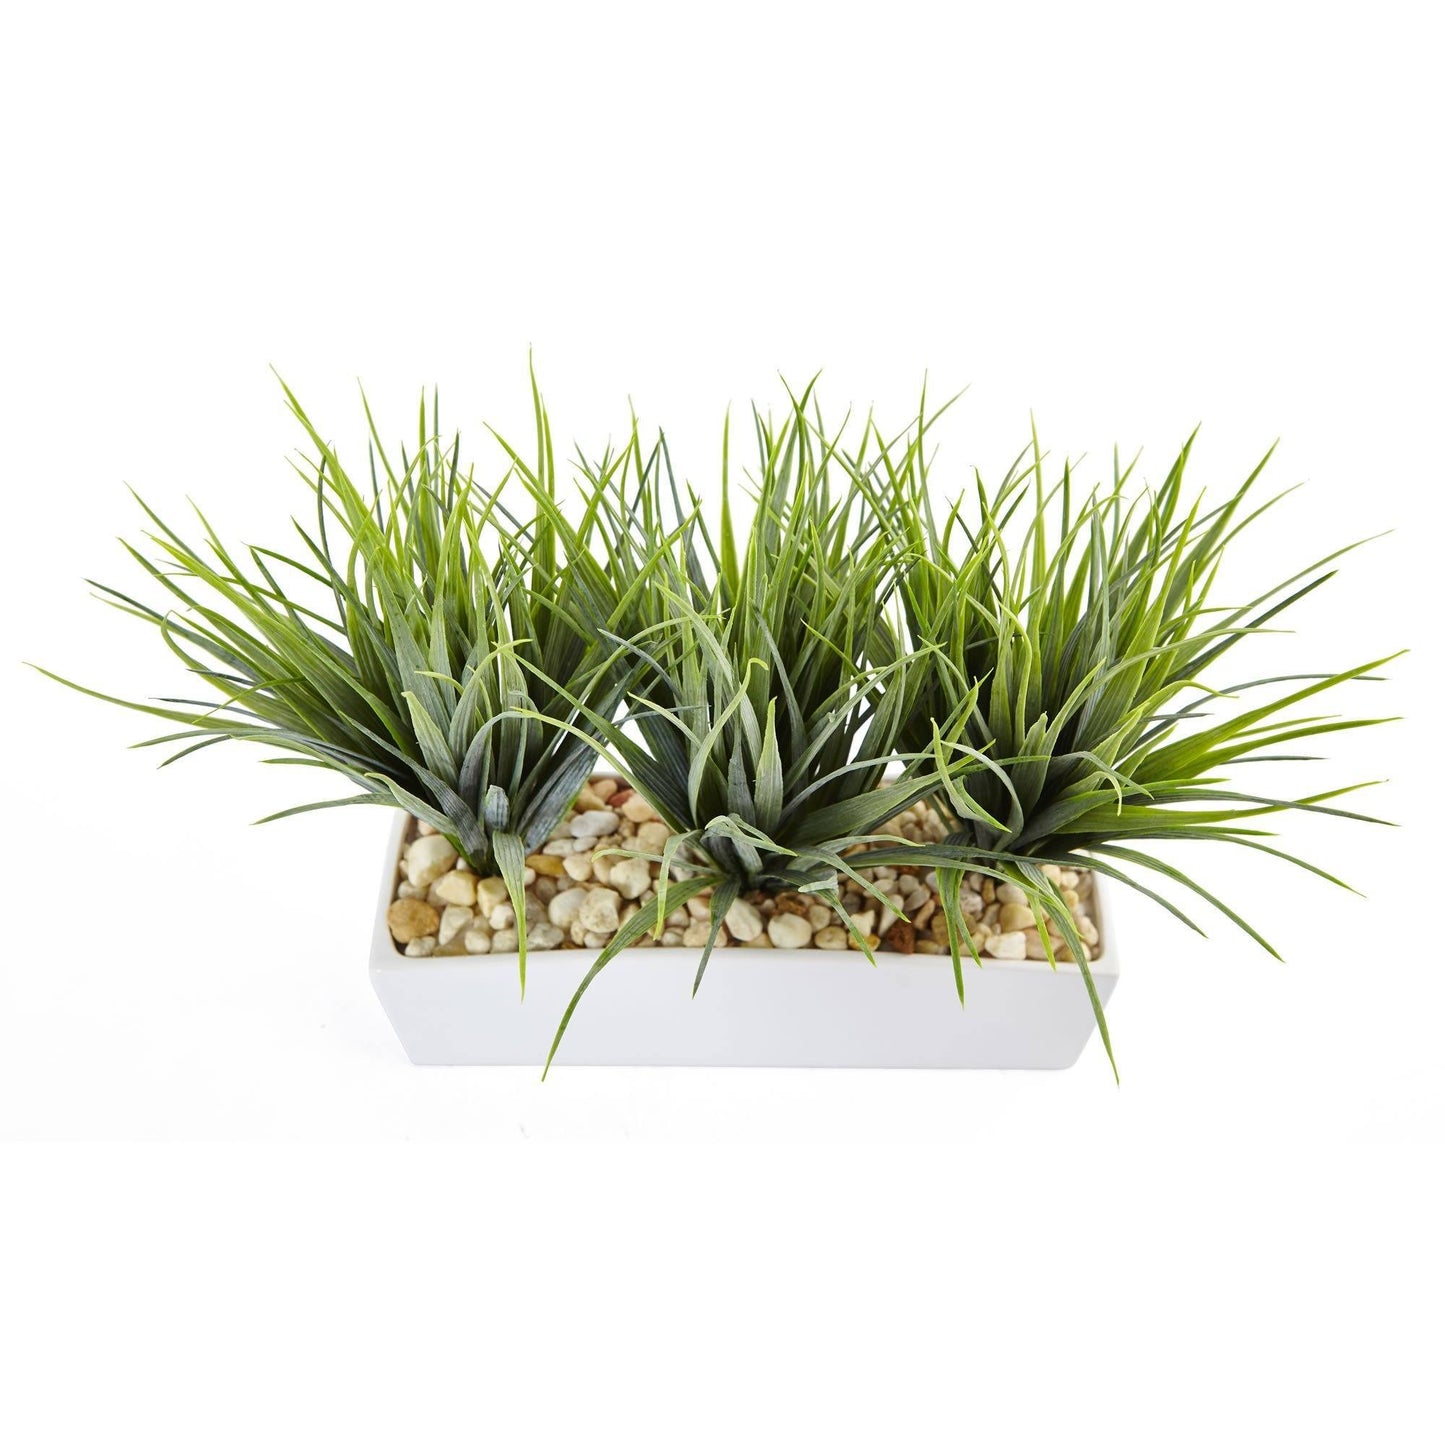 Vanilla Grass in Rectangular Planter by Nearly Natural